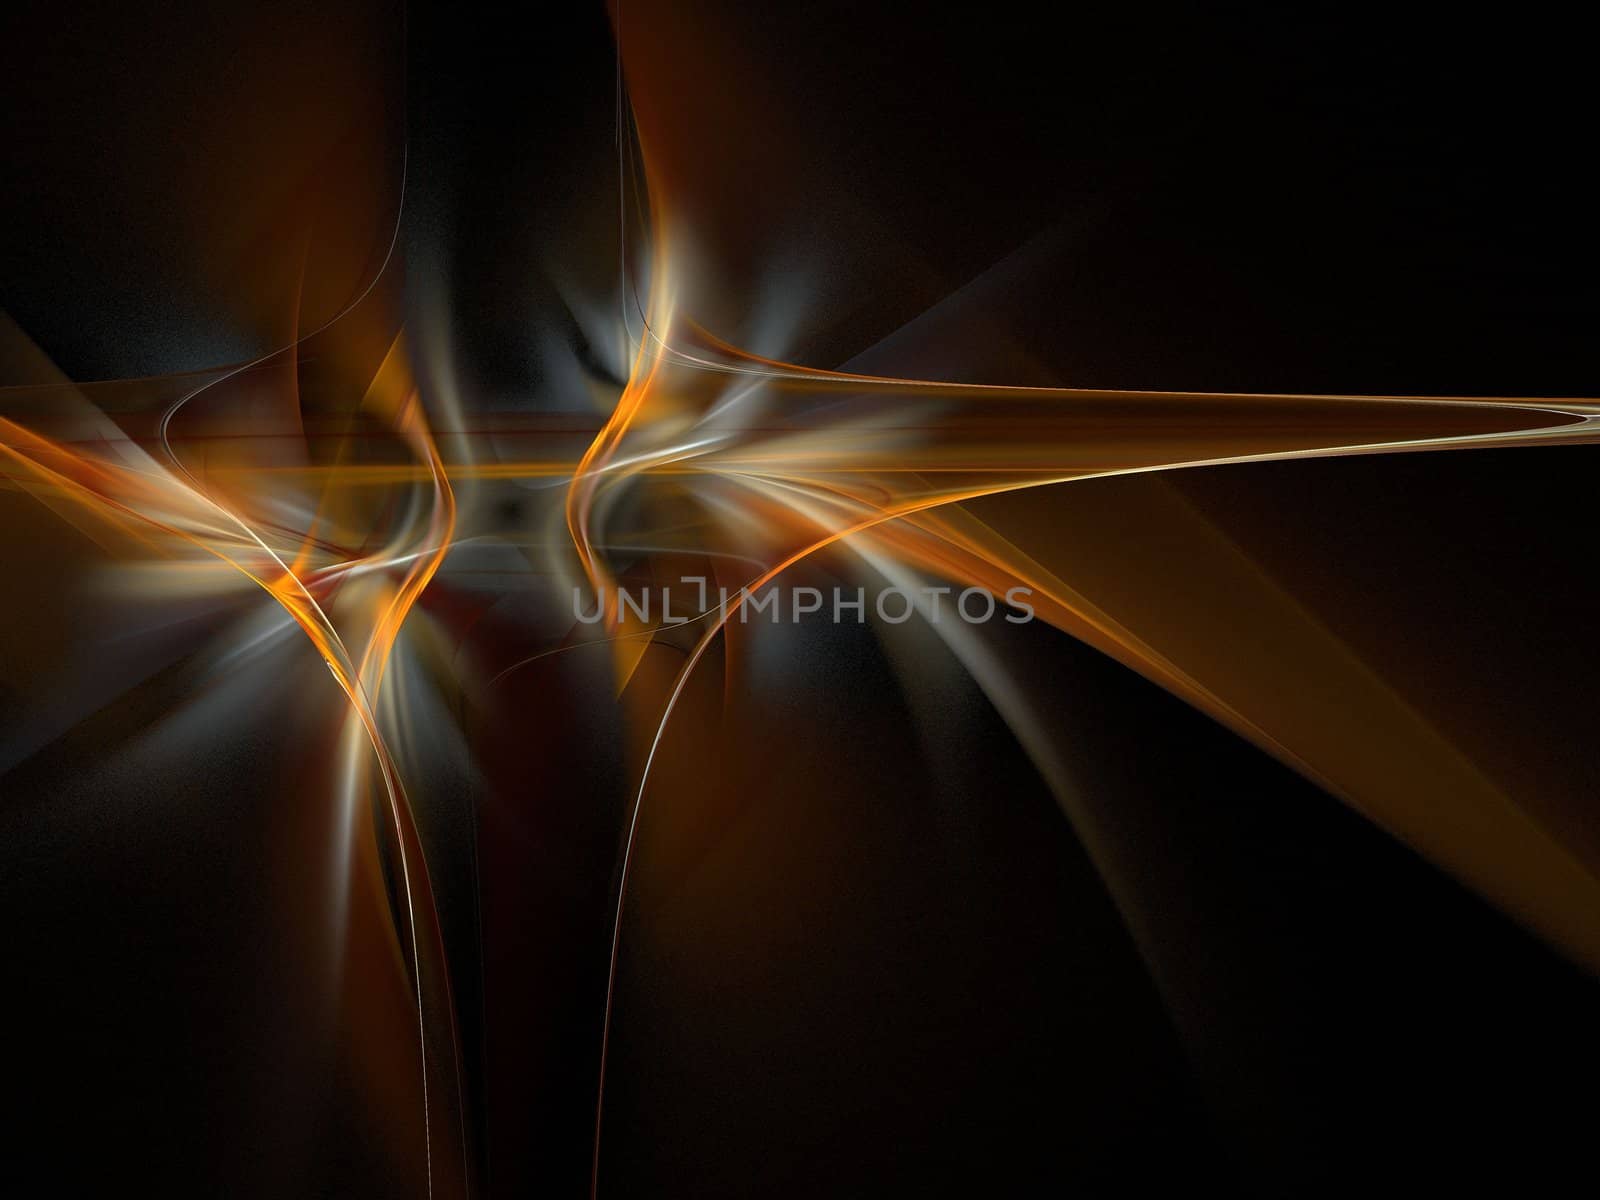 Colorful abstract fractal background by pmisak